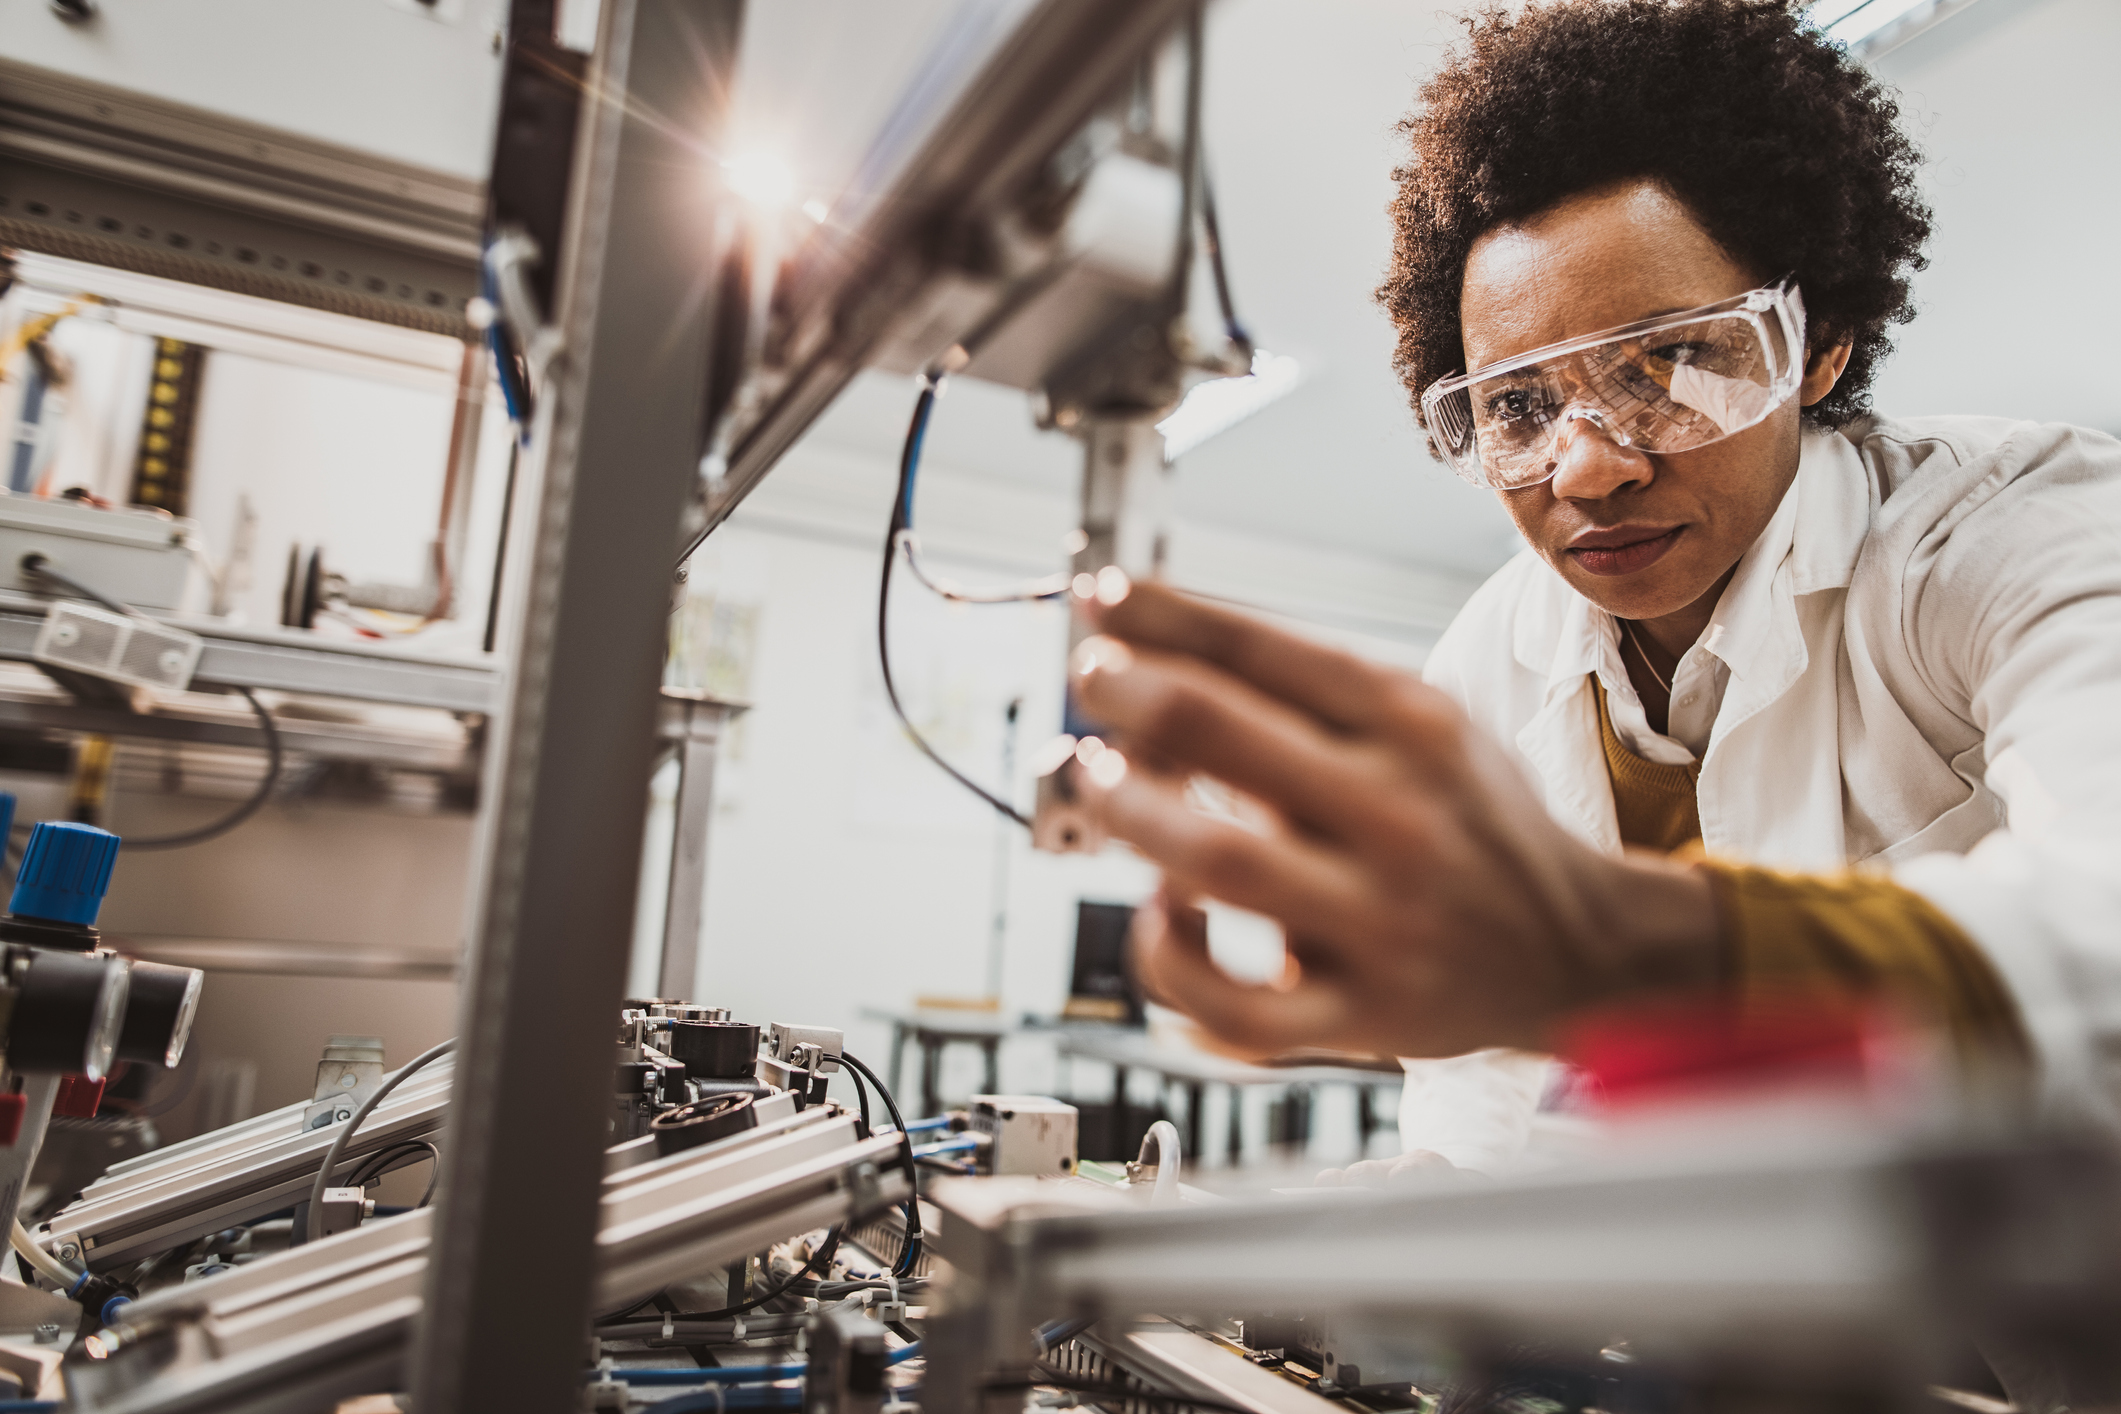 Low angle view of African American lab worker examining machine part while working in a lab.